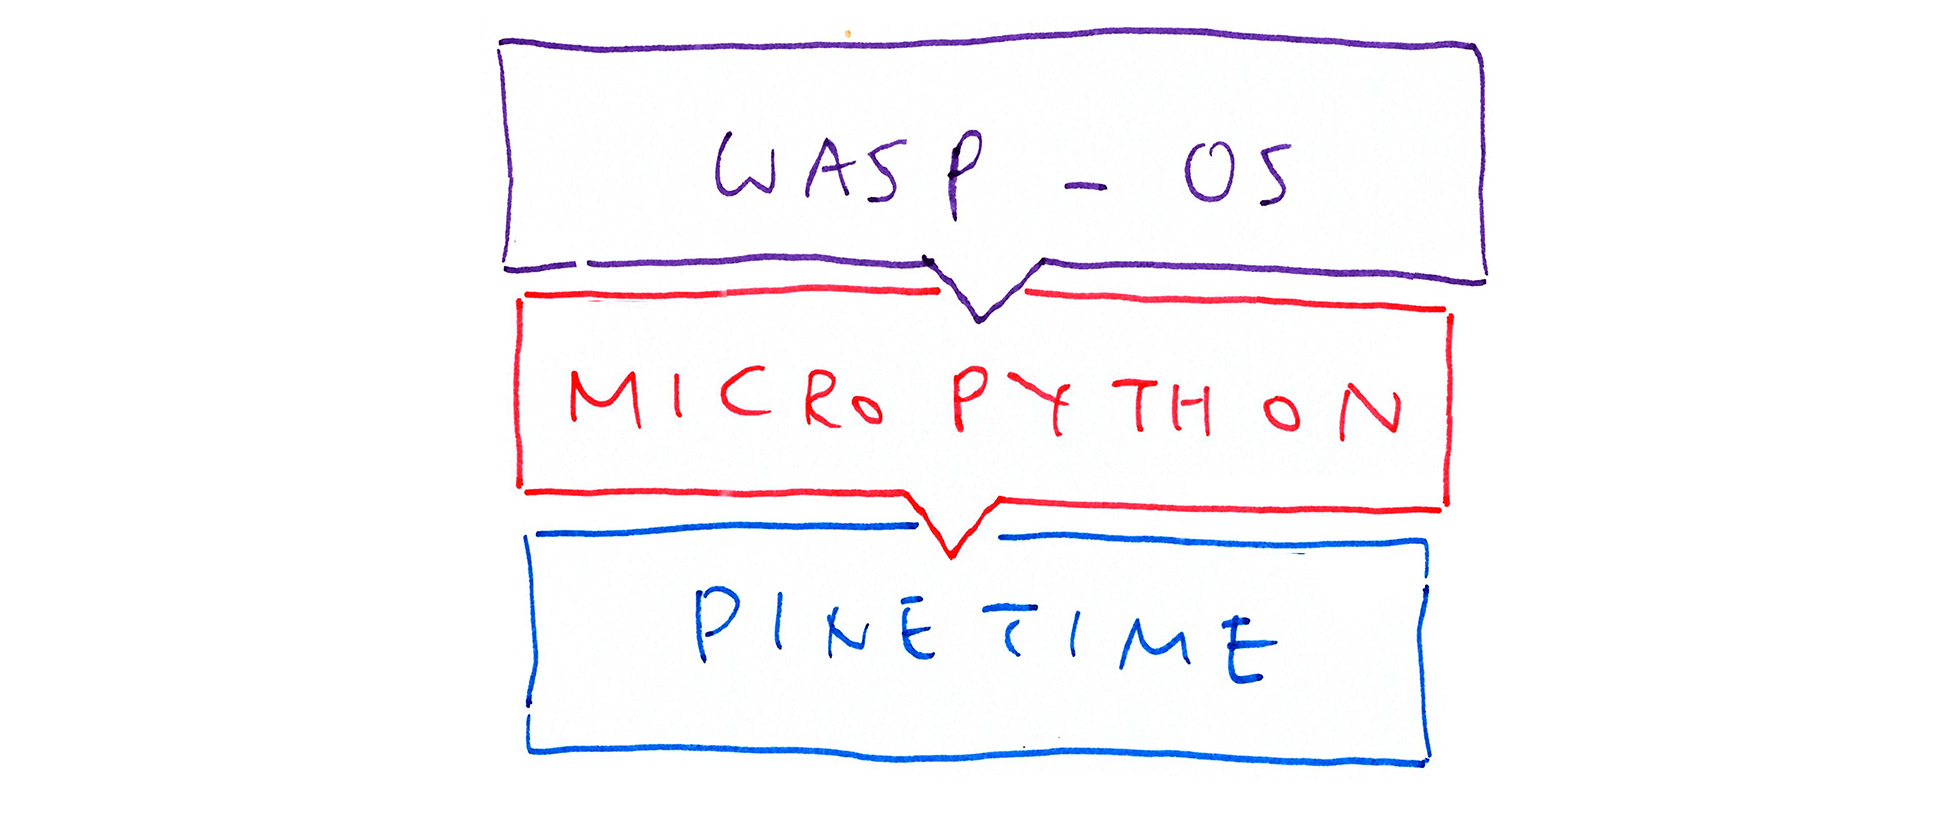 MicroPython and wasp-os on PineTime